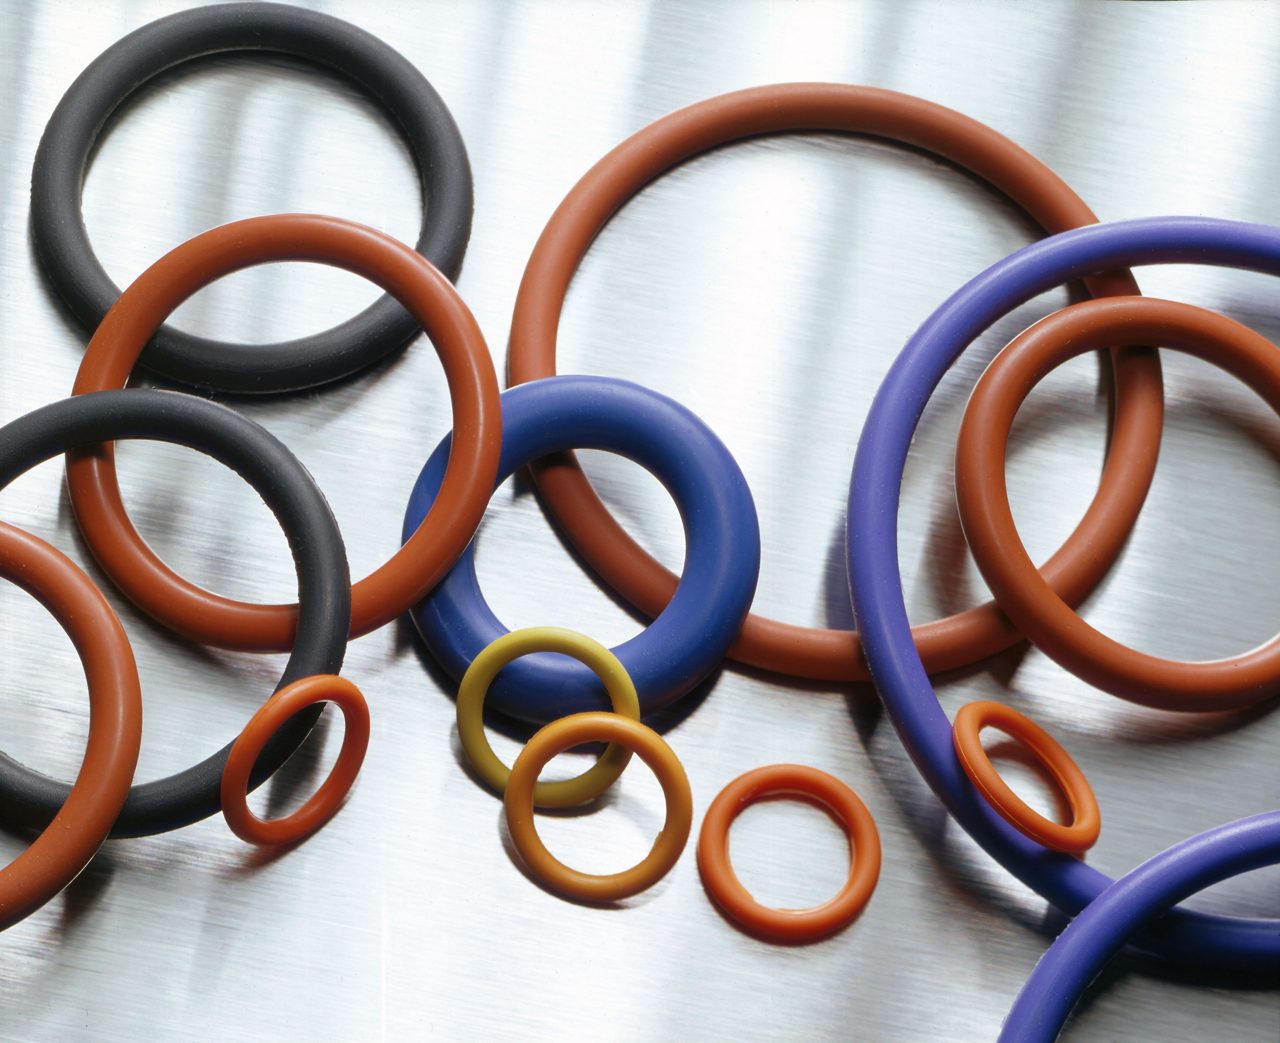 O-rings made from Fluorosilicone Rubber over metallic background